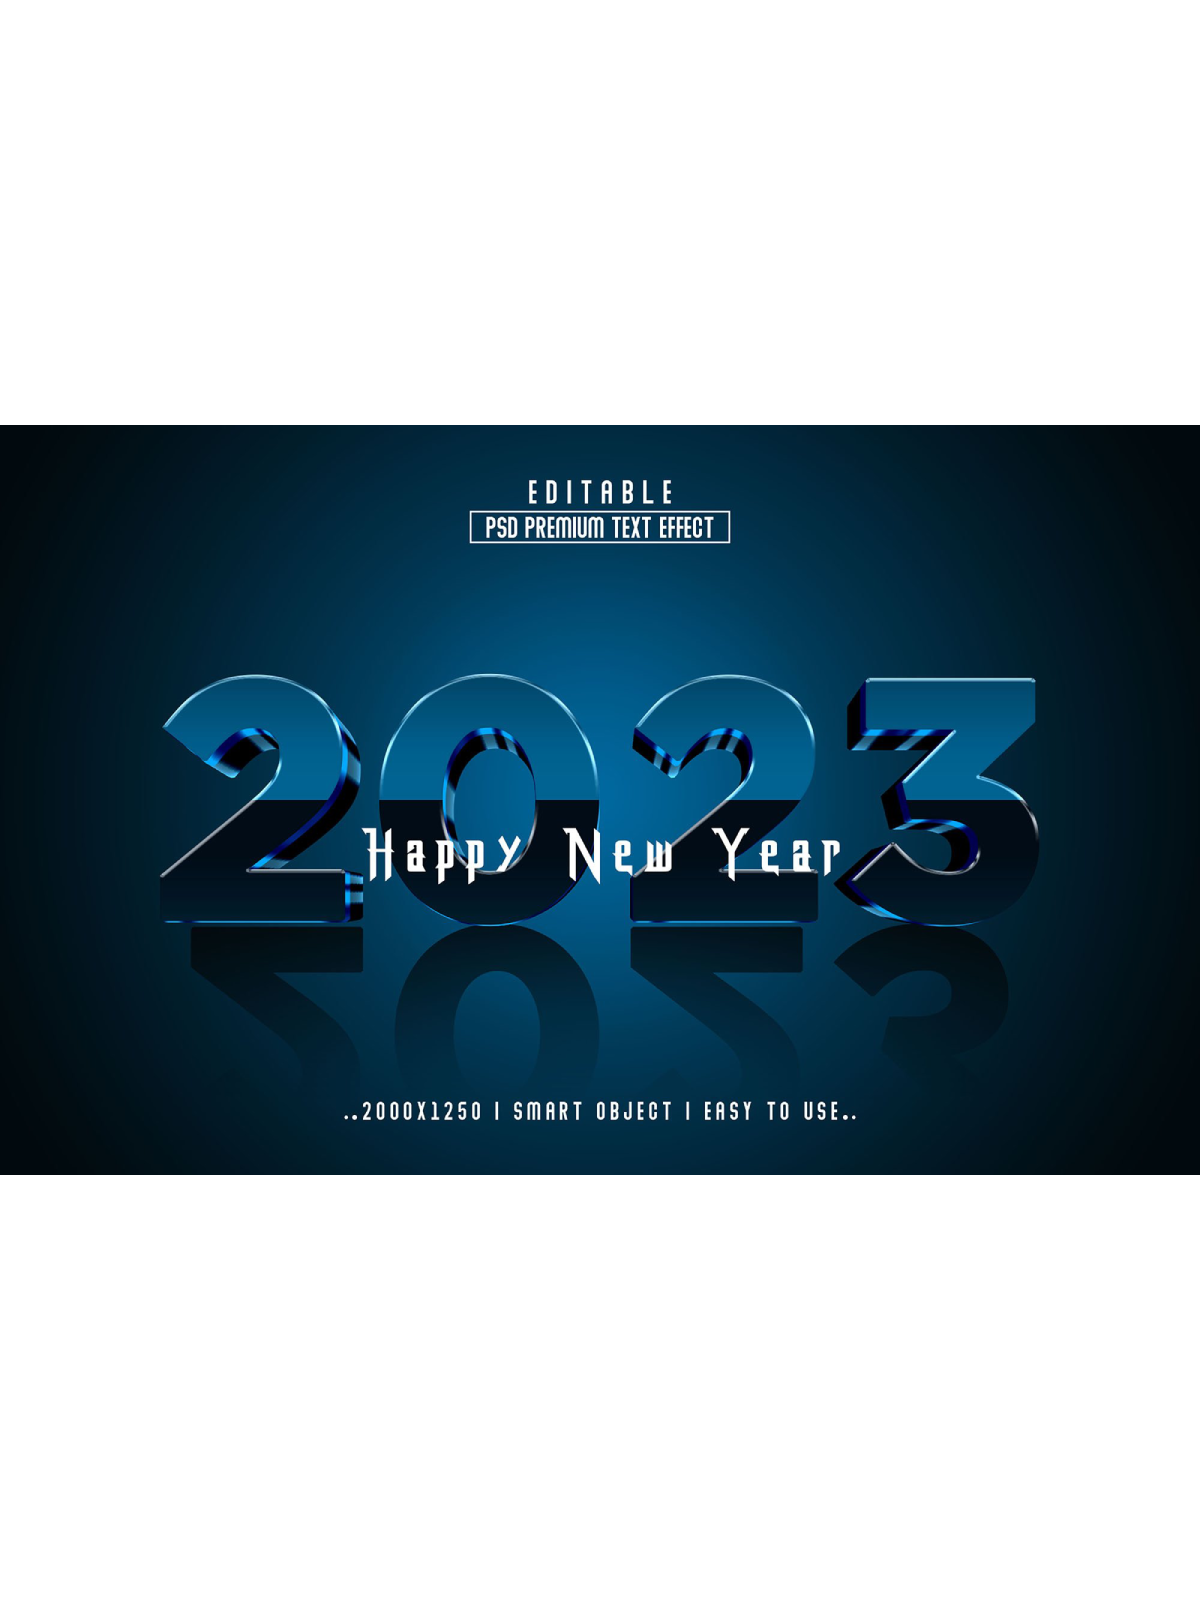 Happy new year 2013 greeting card.